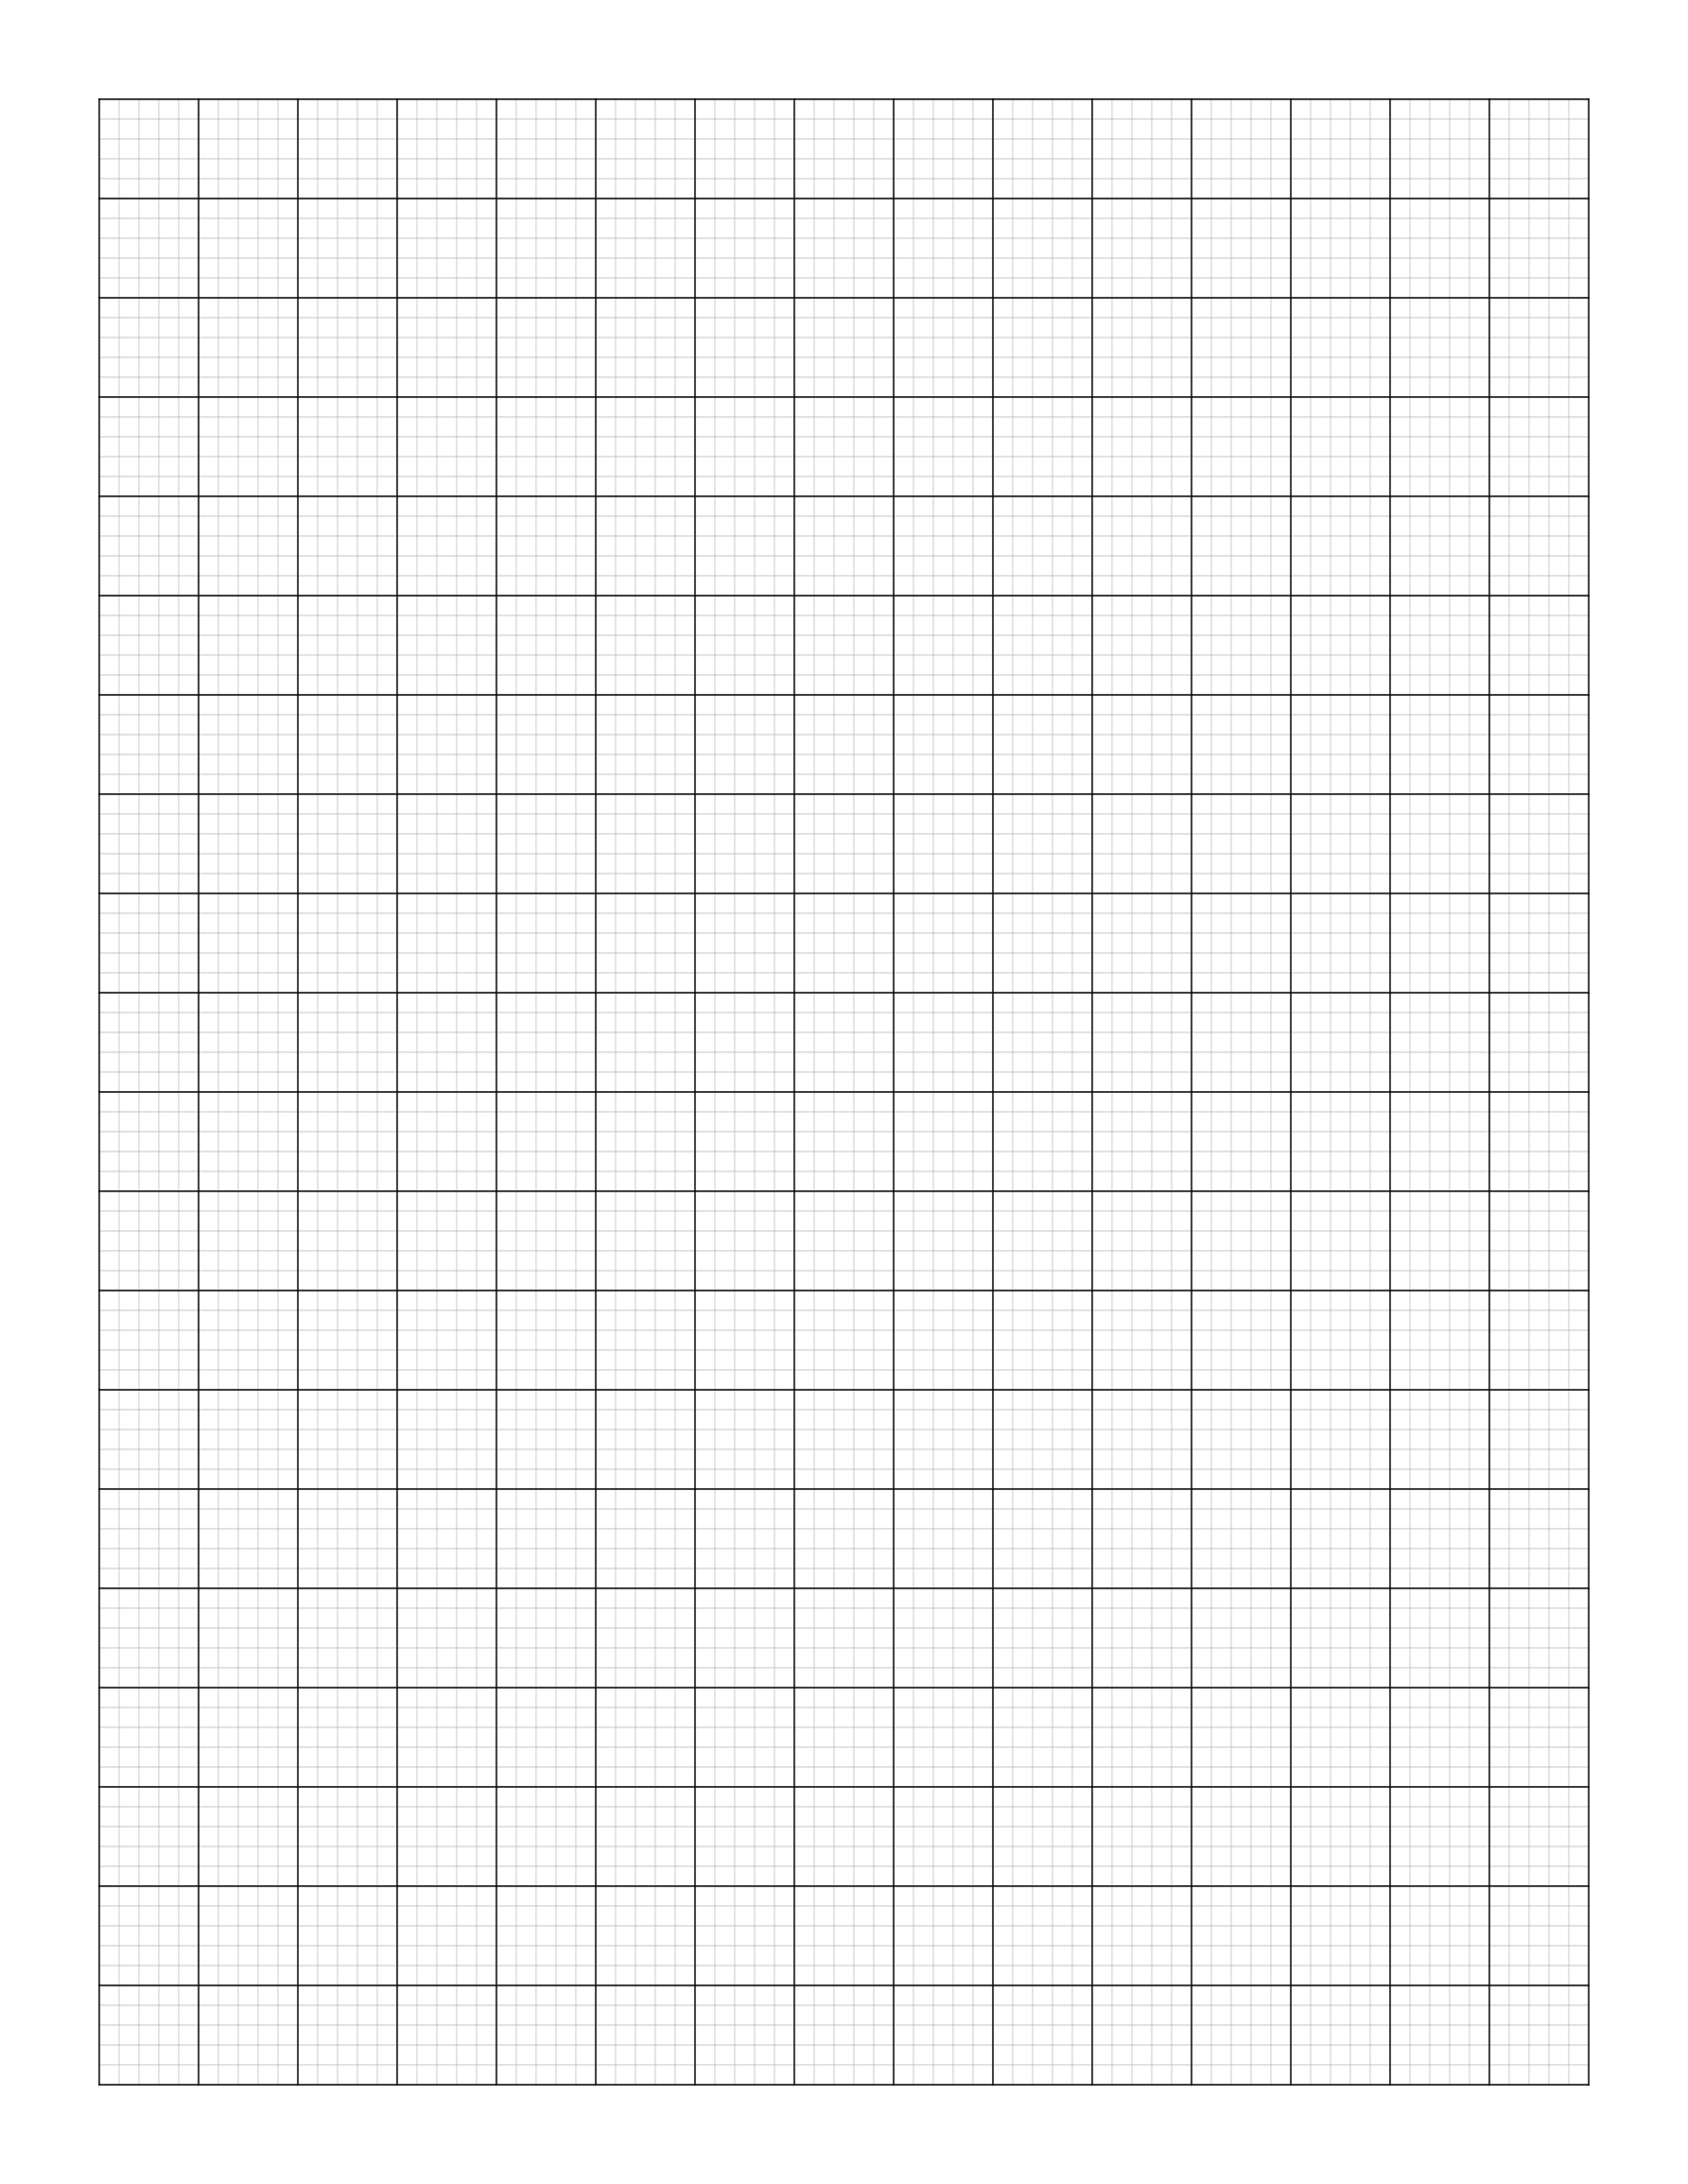 One Inch Graph Paper To Print Kaza psstech co Half Inch Grid Paper 